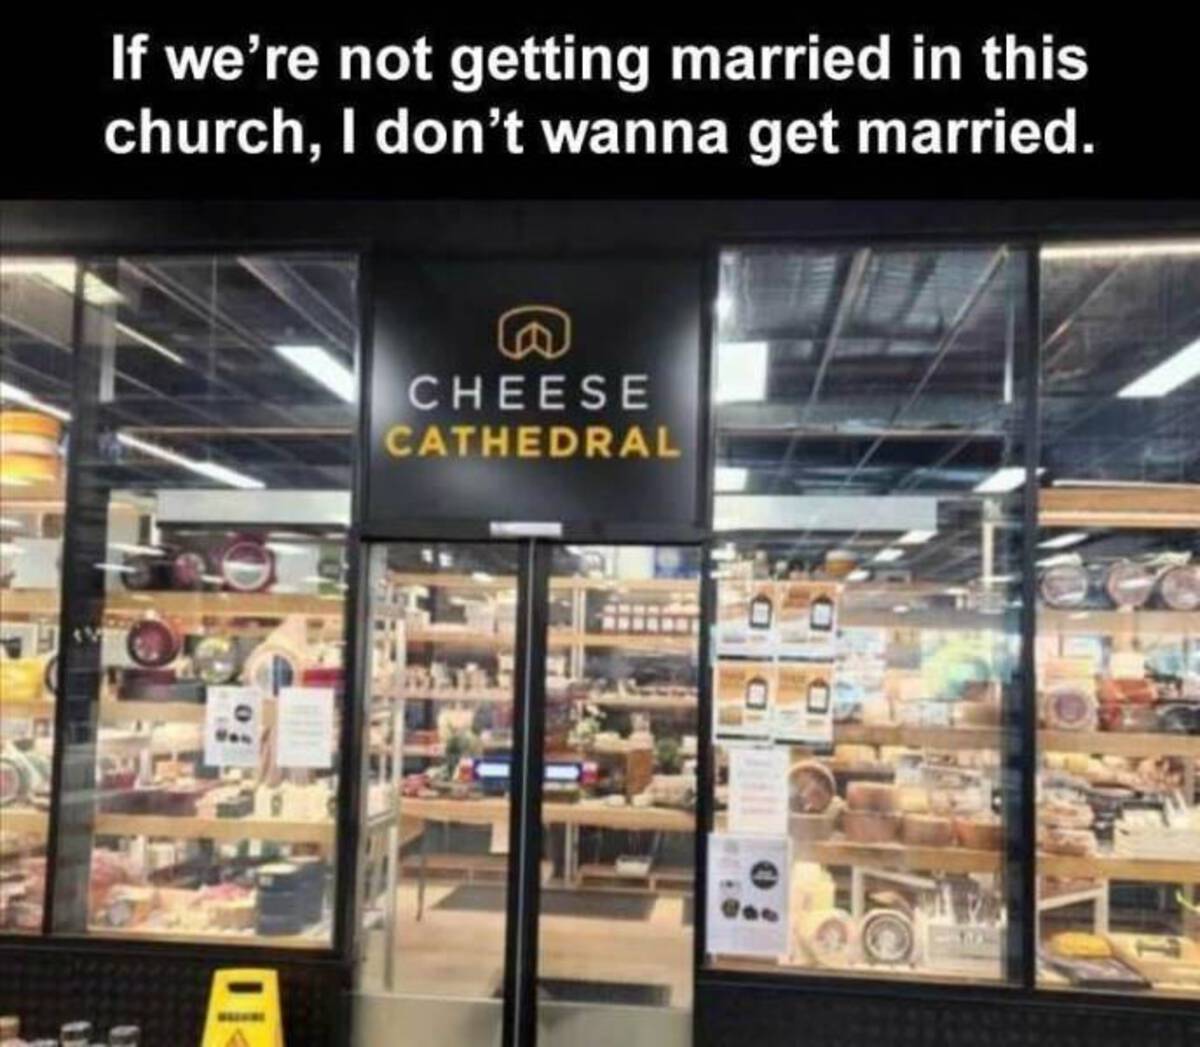 church of cheese - If we're not getting married in this church, I don't wanna get married. Cheese Cathedral D